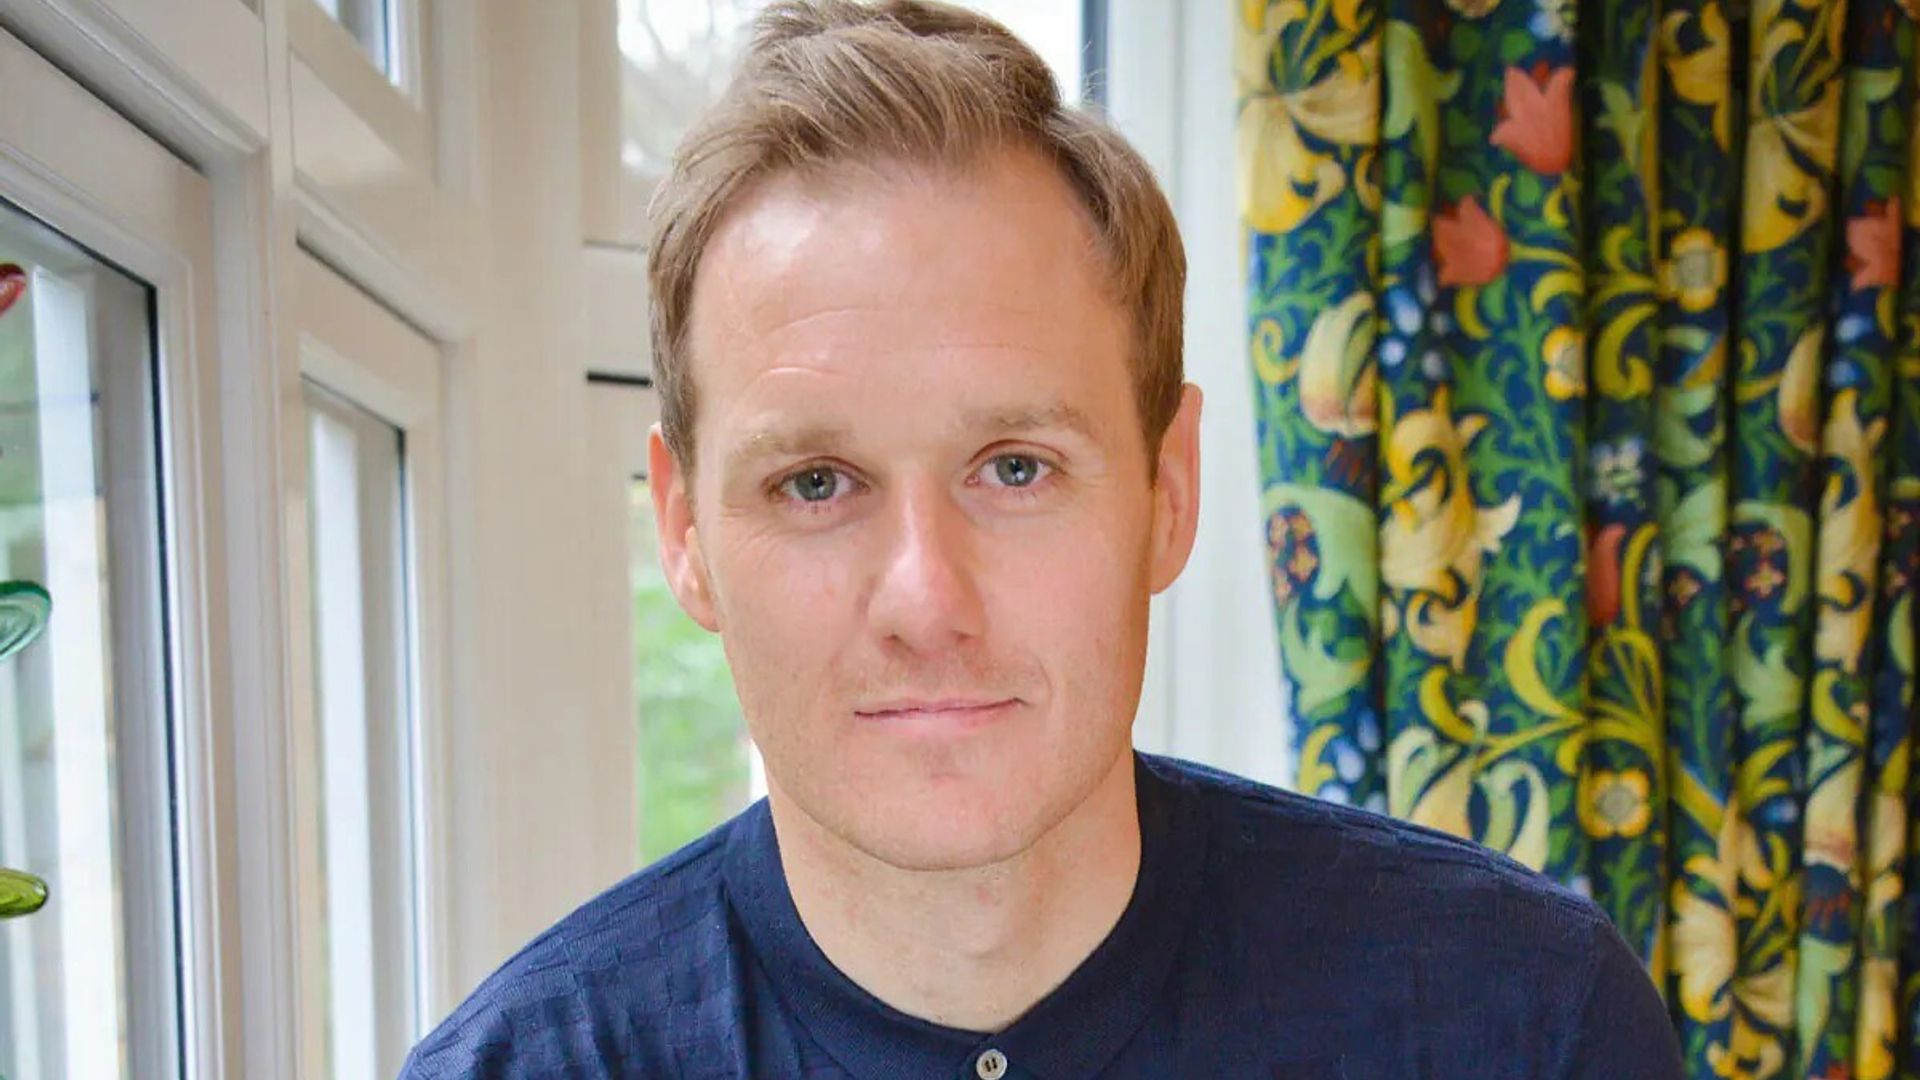 Dan Walker forced to clarify the reason behind shock BBC exit with defiant statement